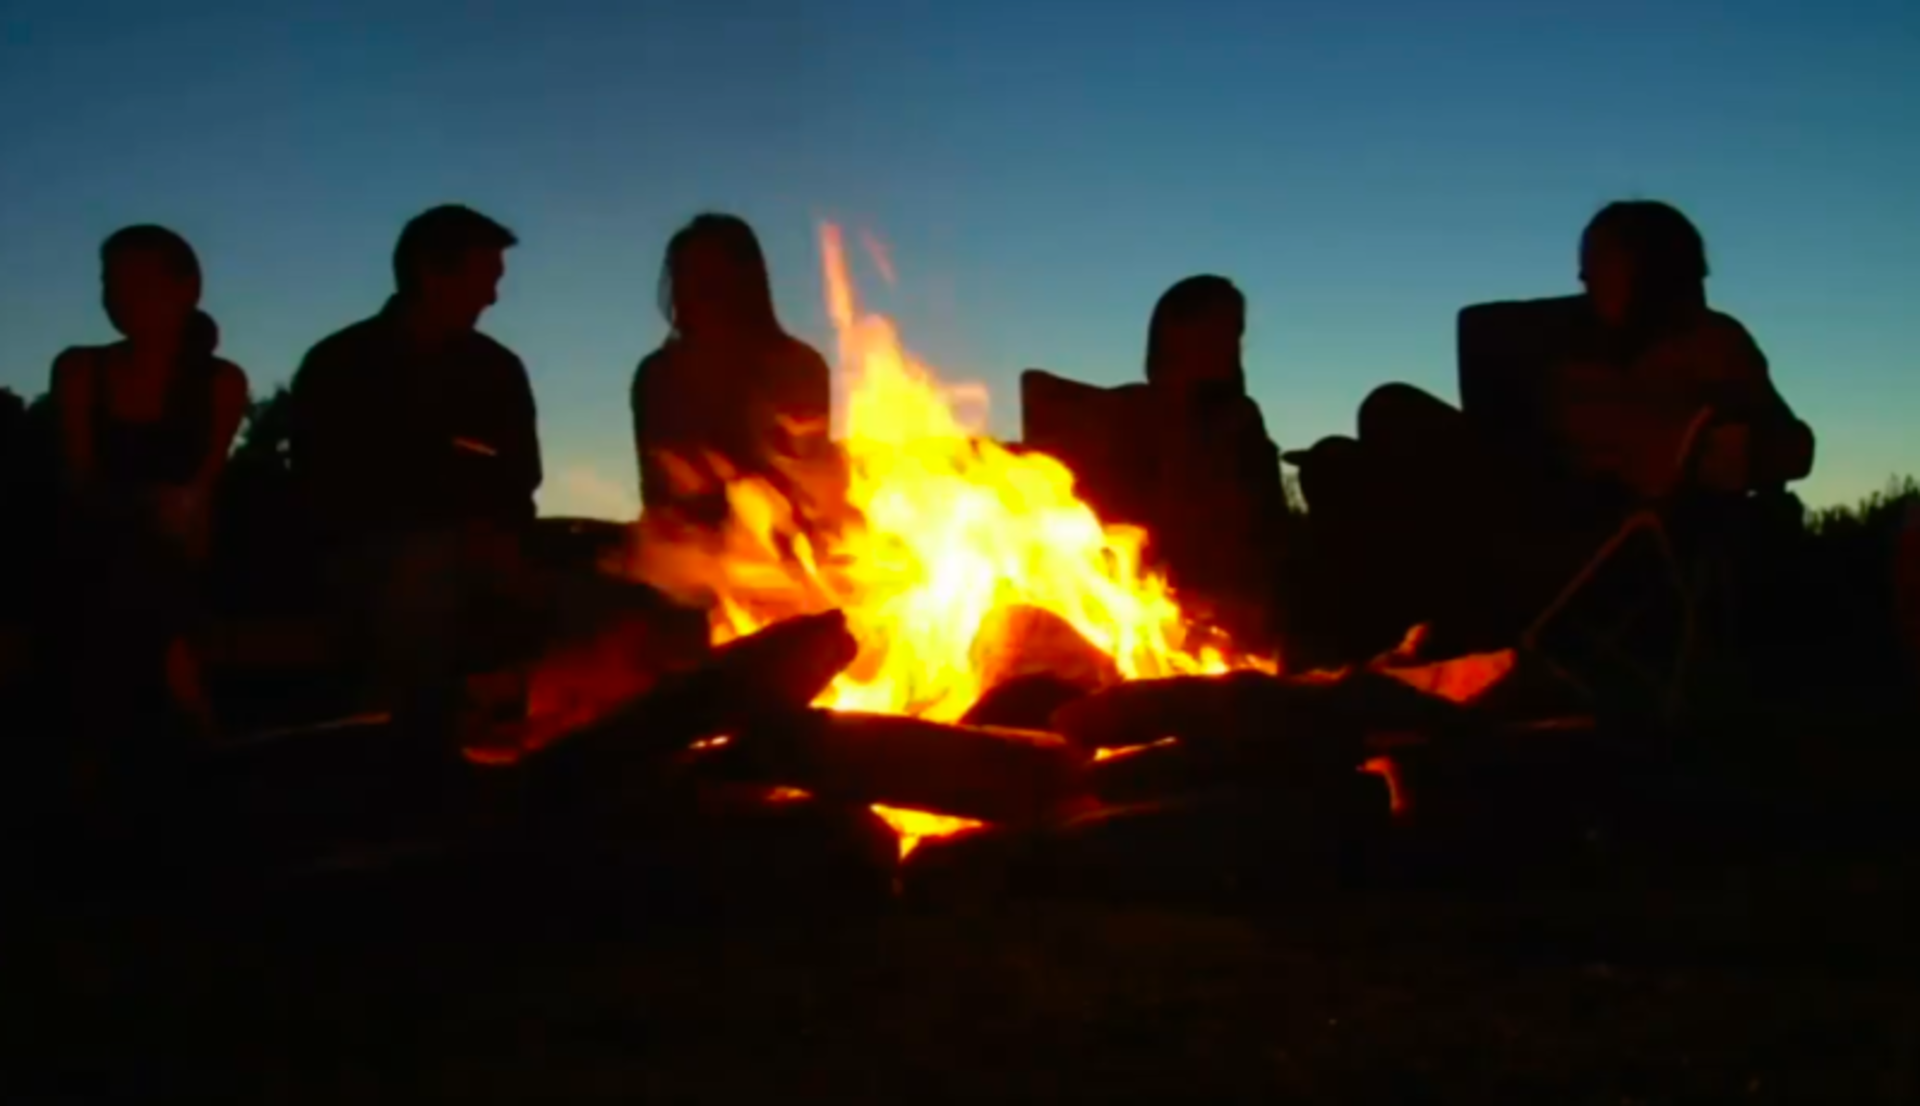 Out camping? Here's how to safely put out your campfire